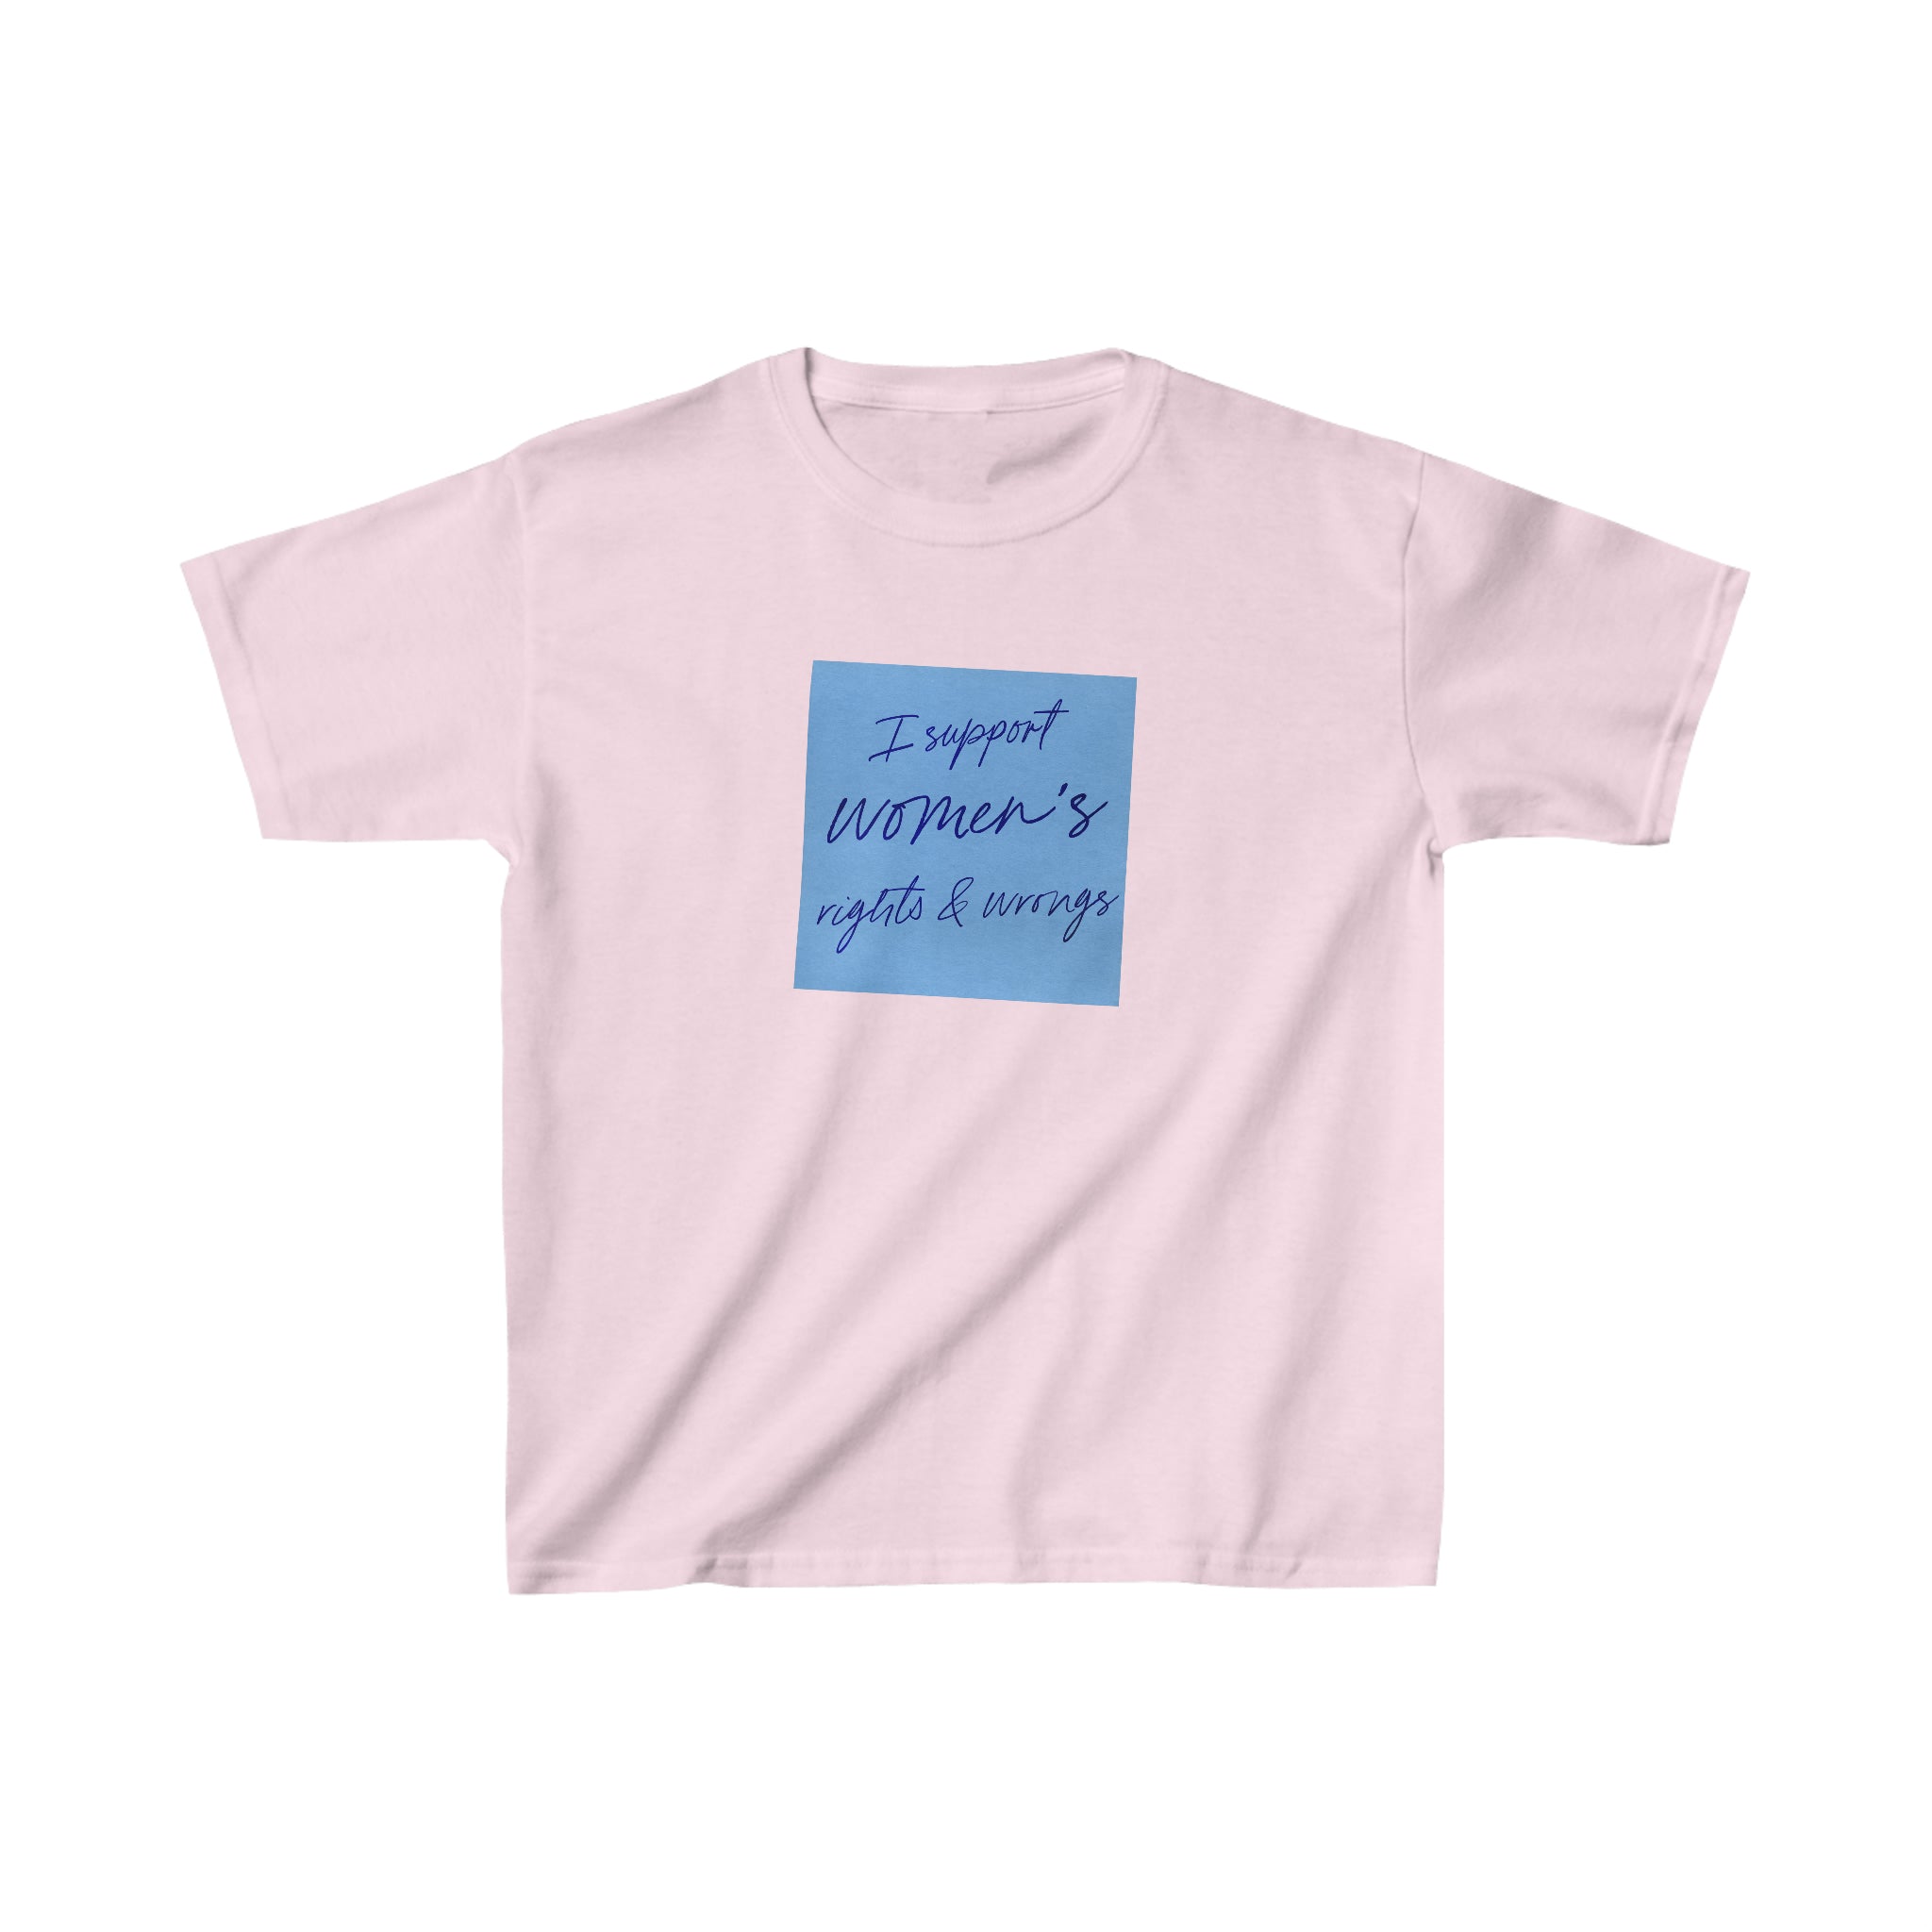 'I support women's rights & wrongs' baby tee